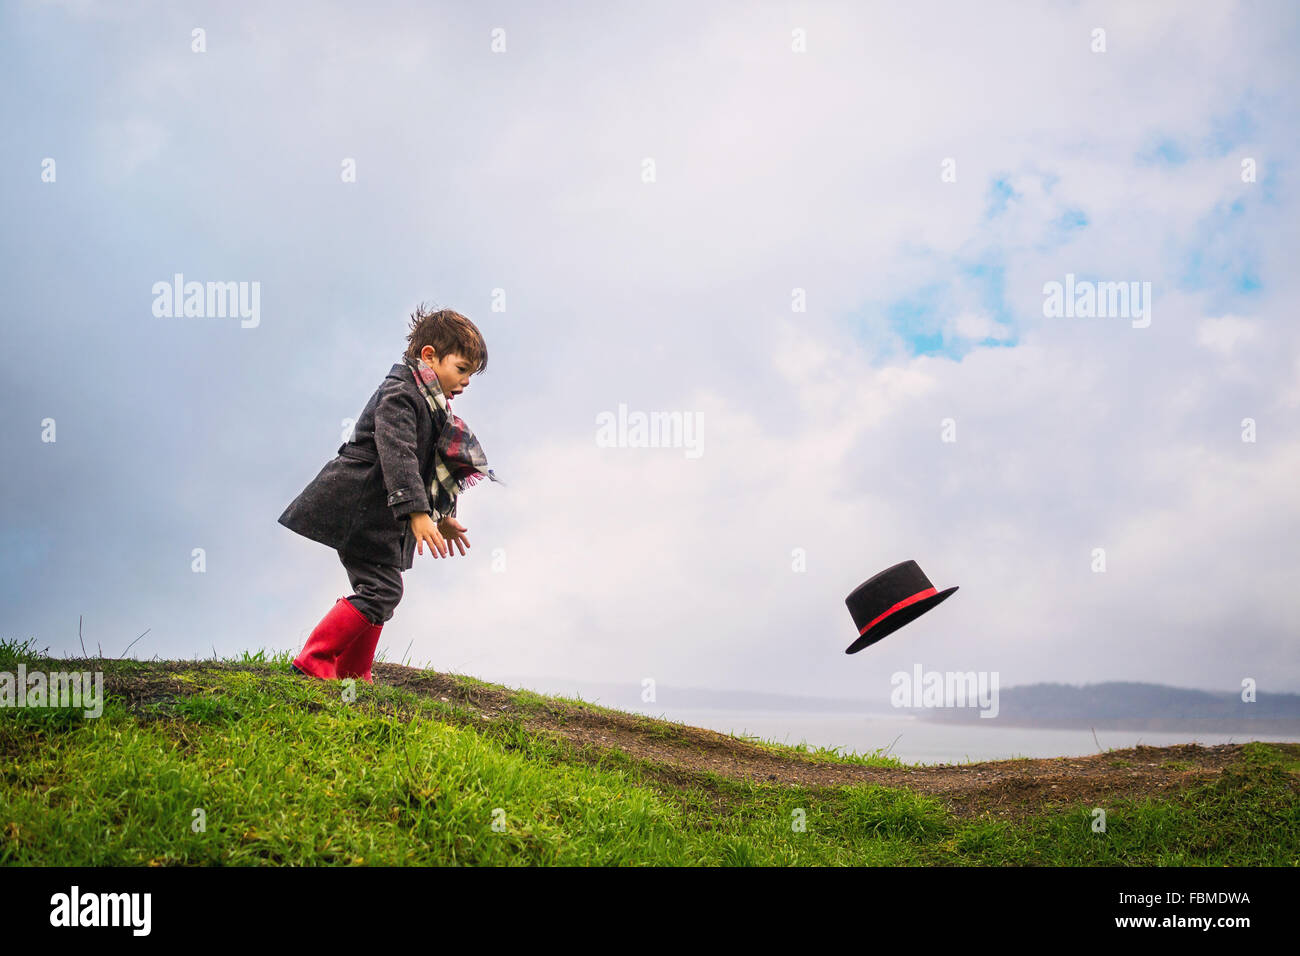 Boy chasing his hat blowing away in the wind Stock Photo